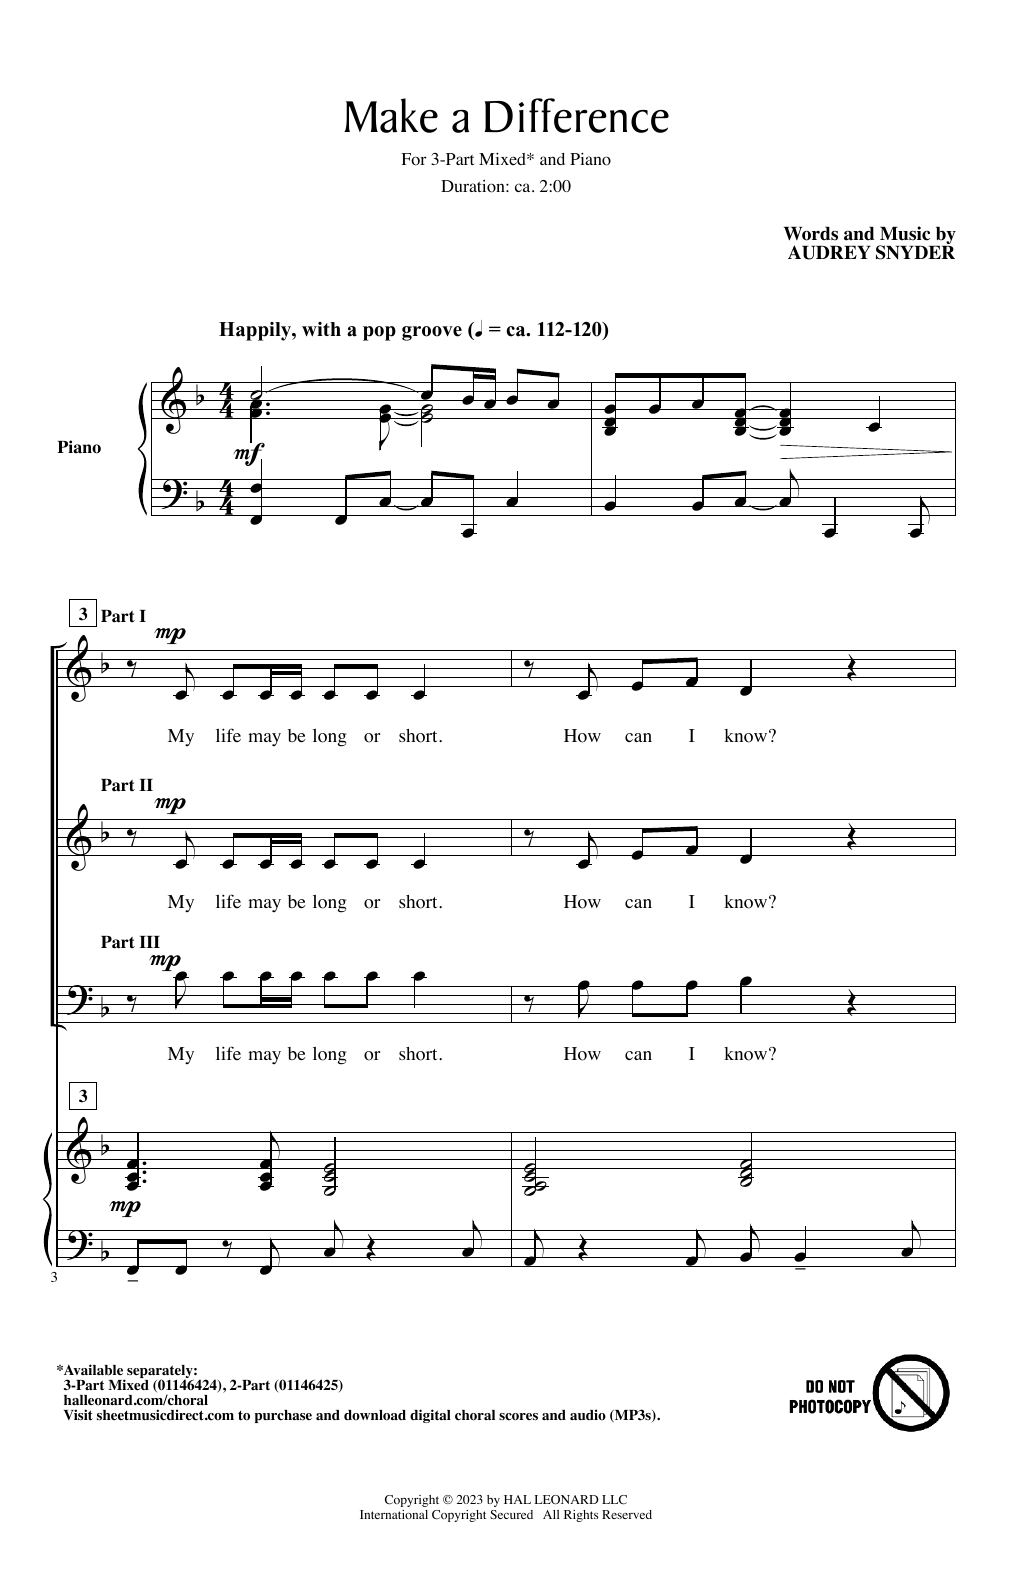 Download Audrey Snyder Make A Difference Sheet Music